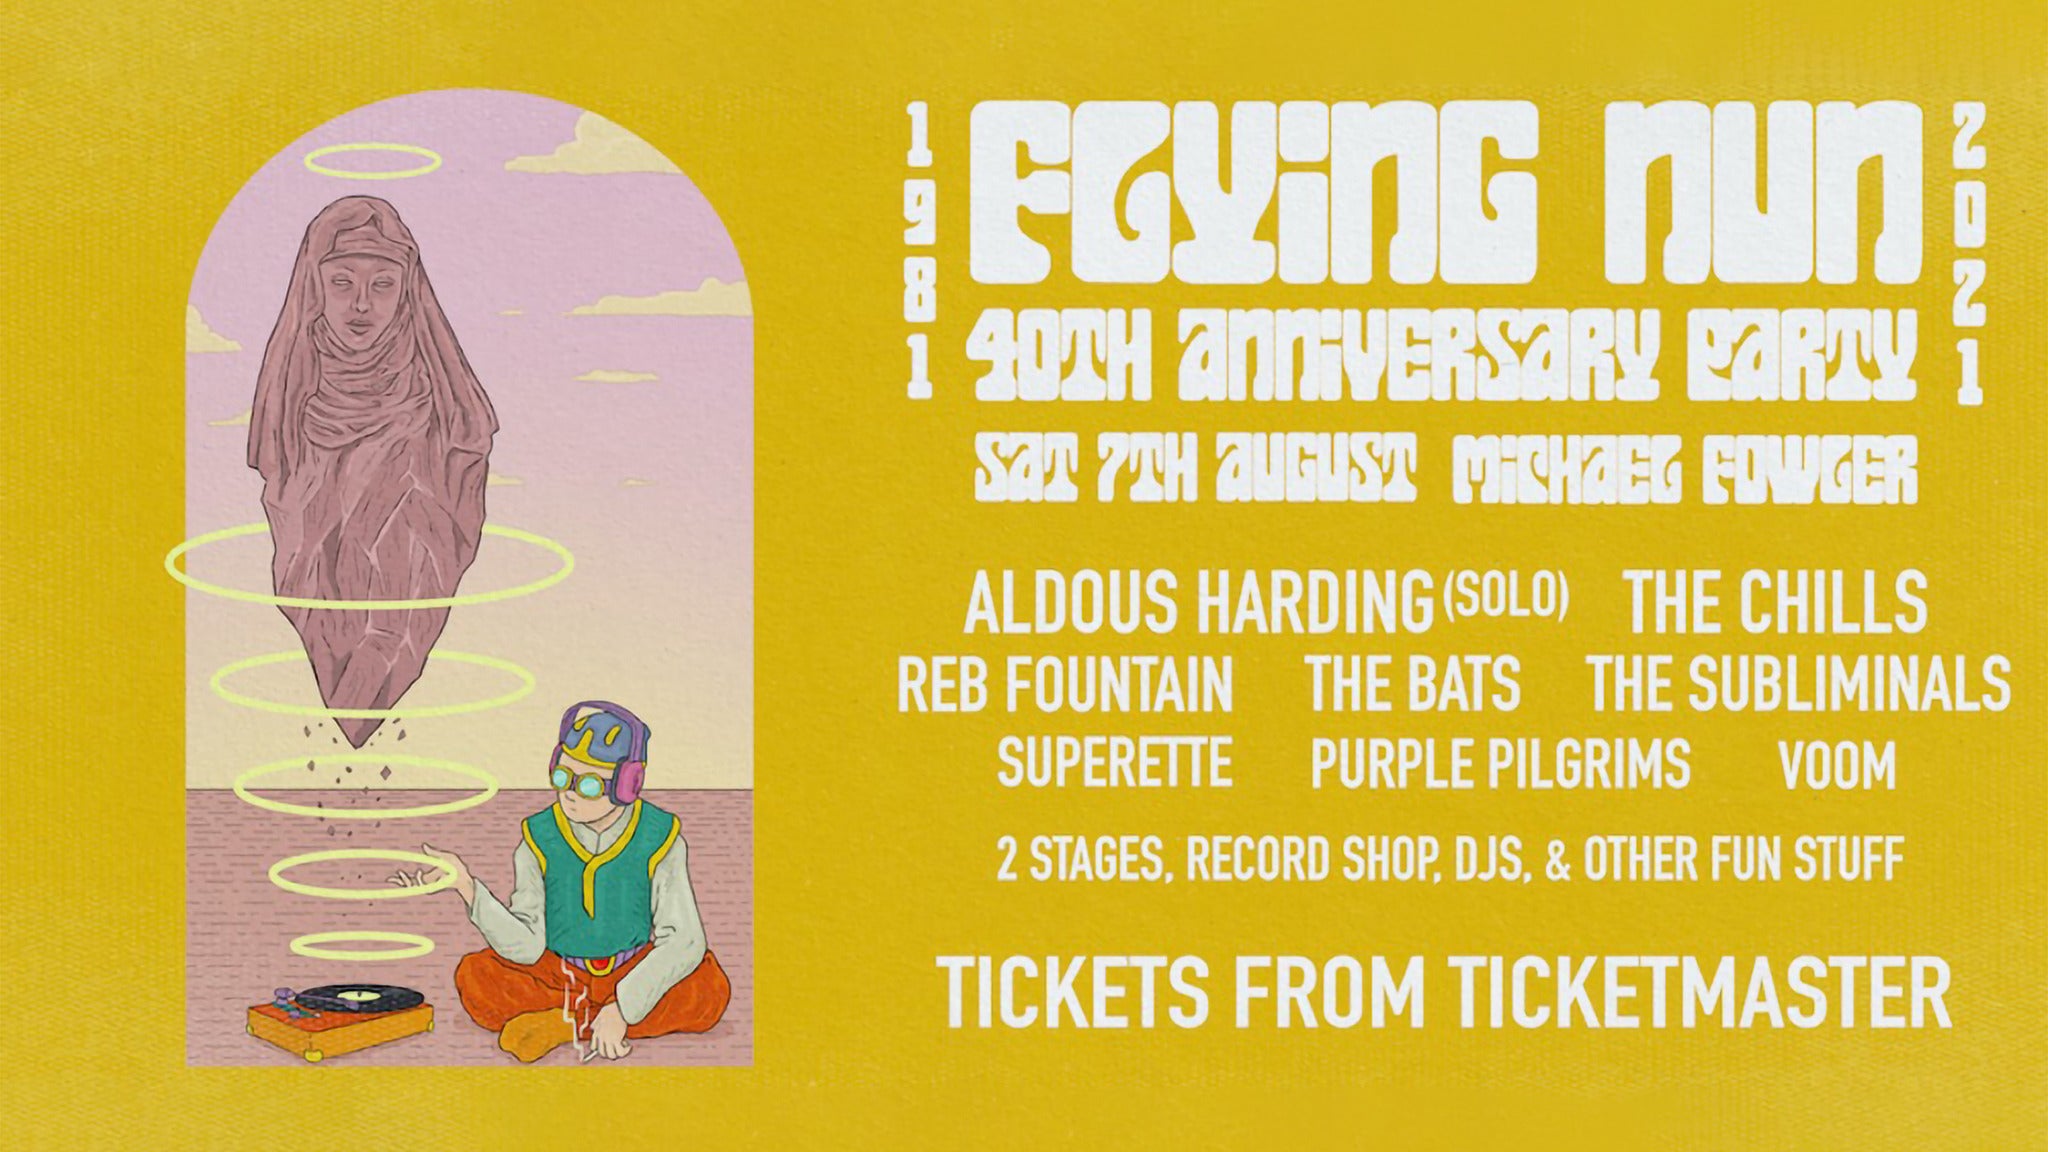 Image used with permission from Ticketmaster | Flying Nun 40th Anniversary Party tickets